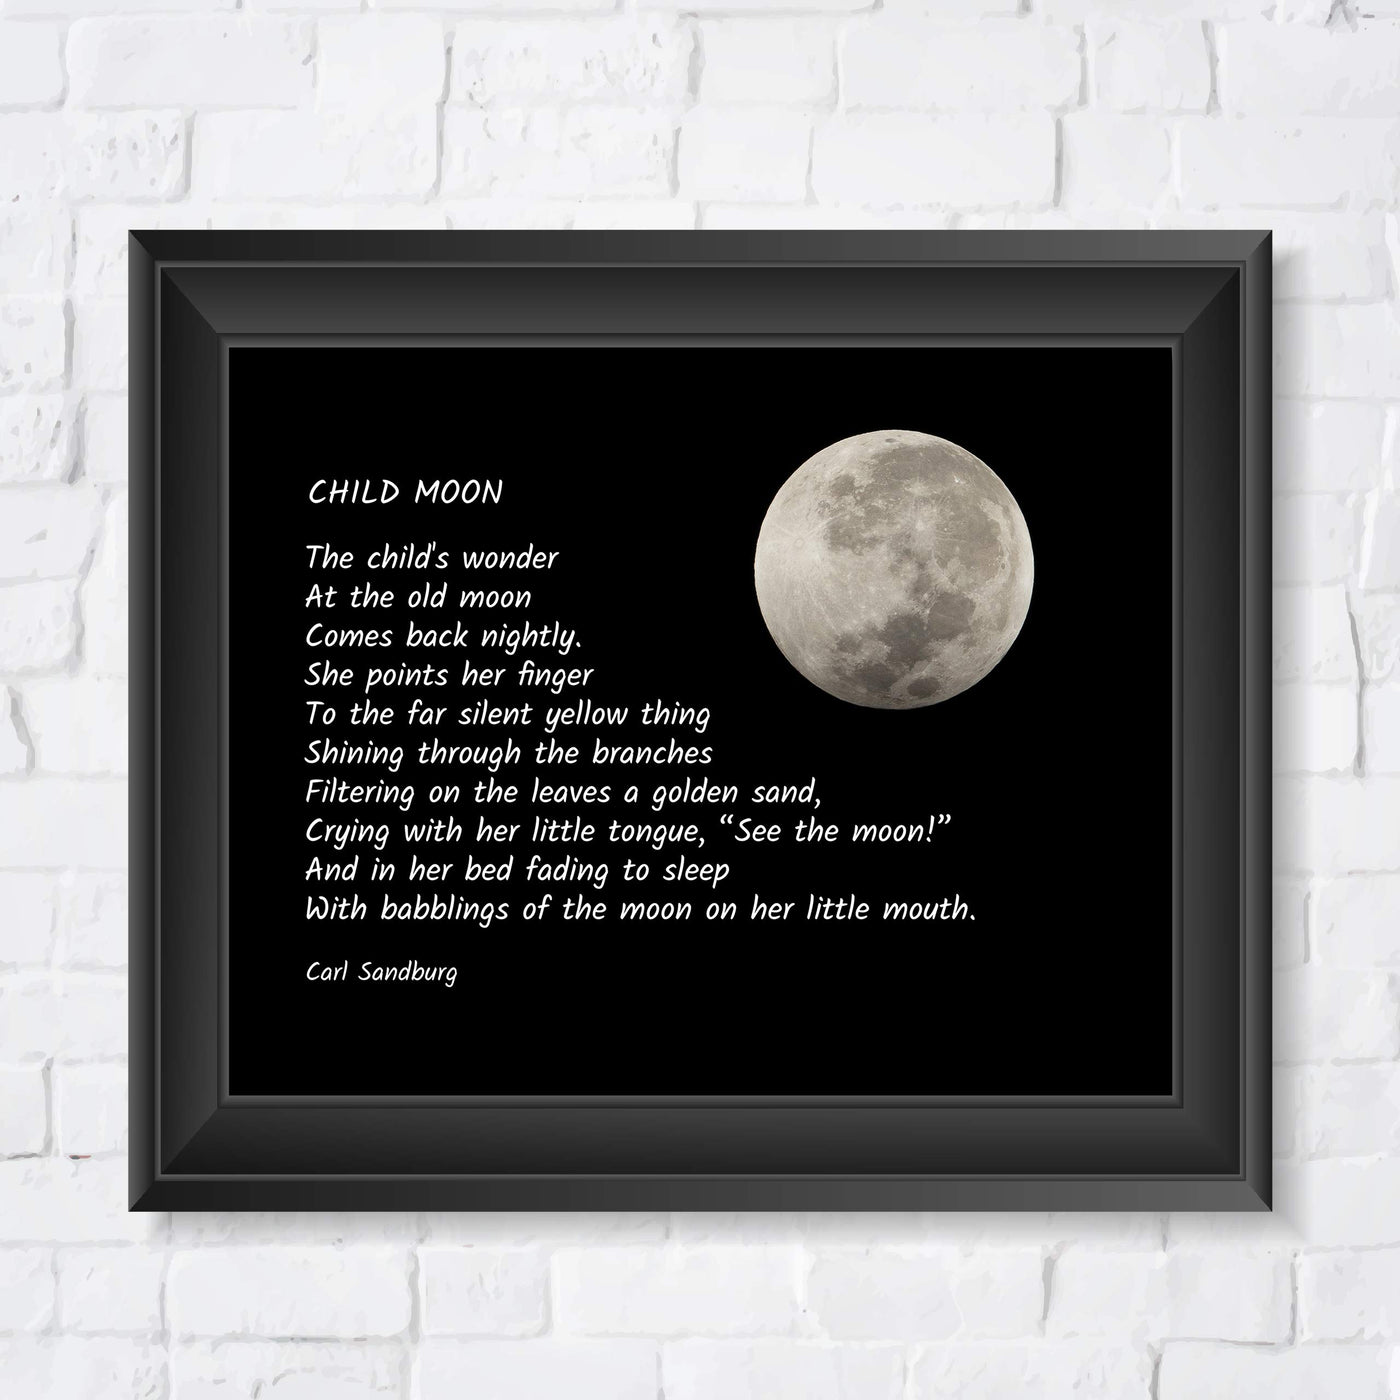 Carl Sandburg Quotes-?Child Moon" Poetic Wall Art Sign -10x8" Inspirational Poster Print with Full Moon Image-Ready to Frame. Home-Office-Classroom-Library Decor. Perfect Nursery-Kids Bedroom Sign!